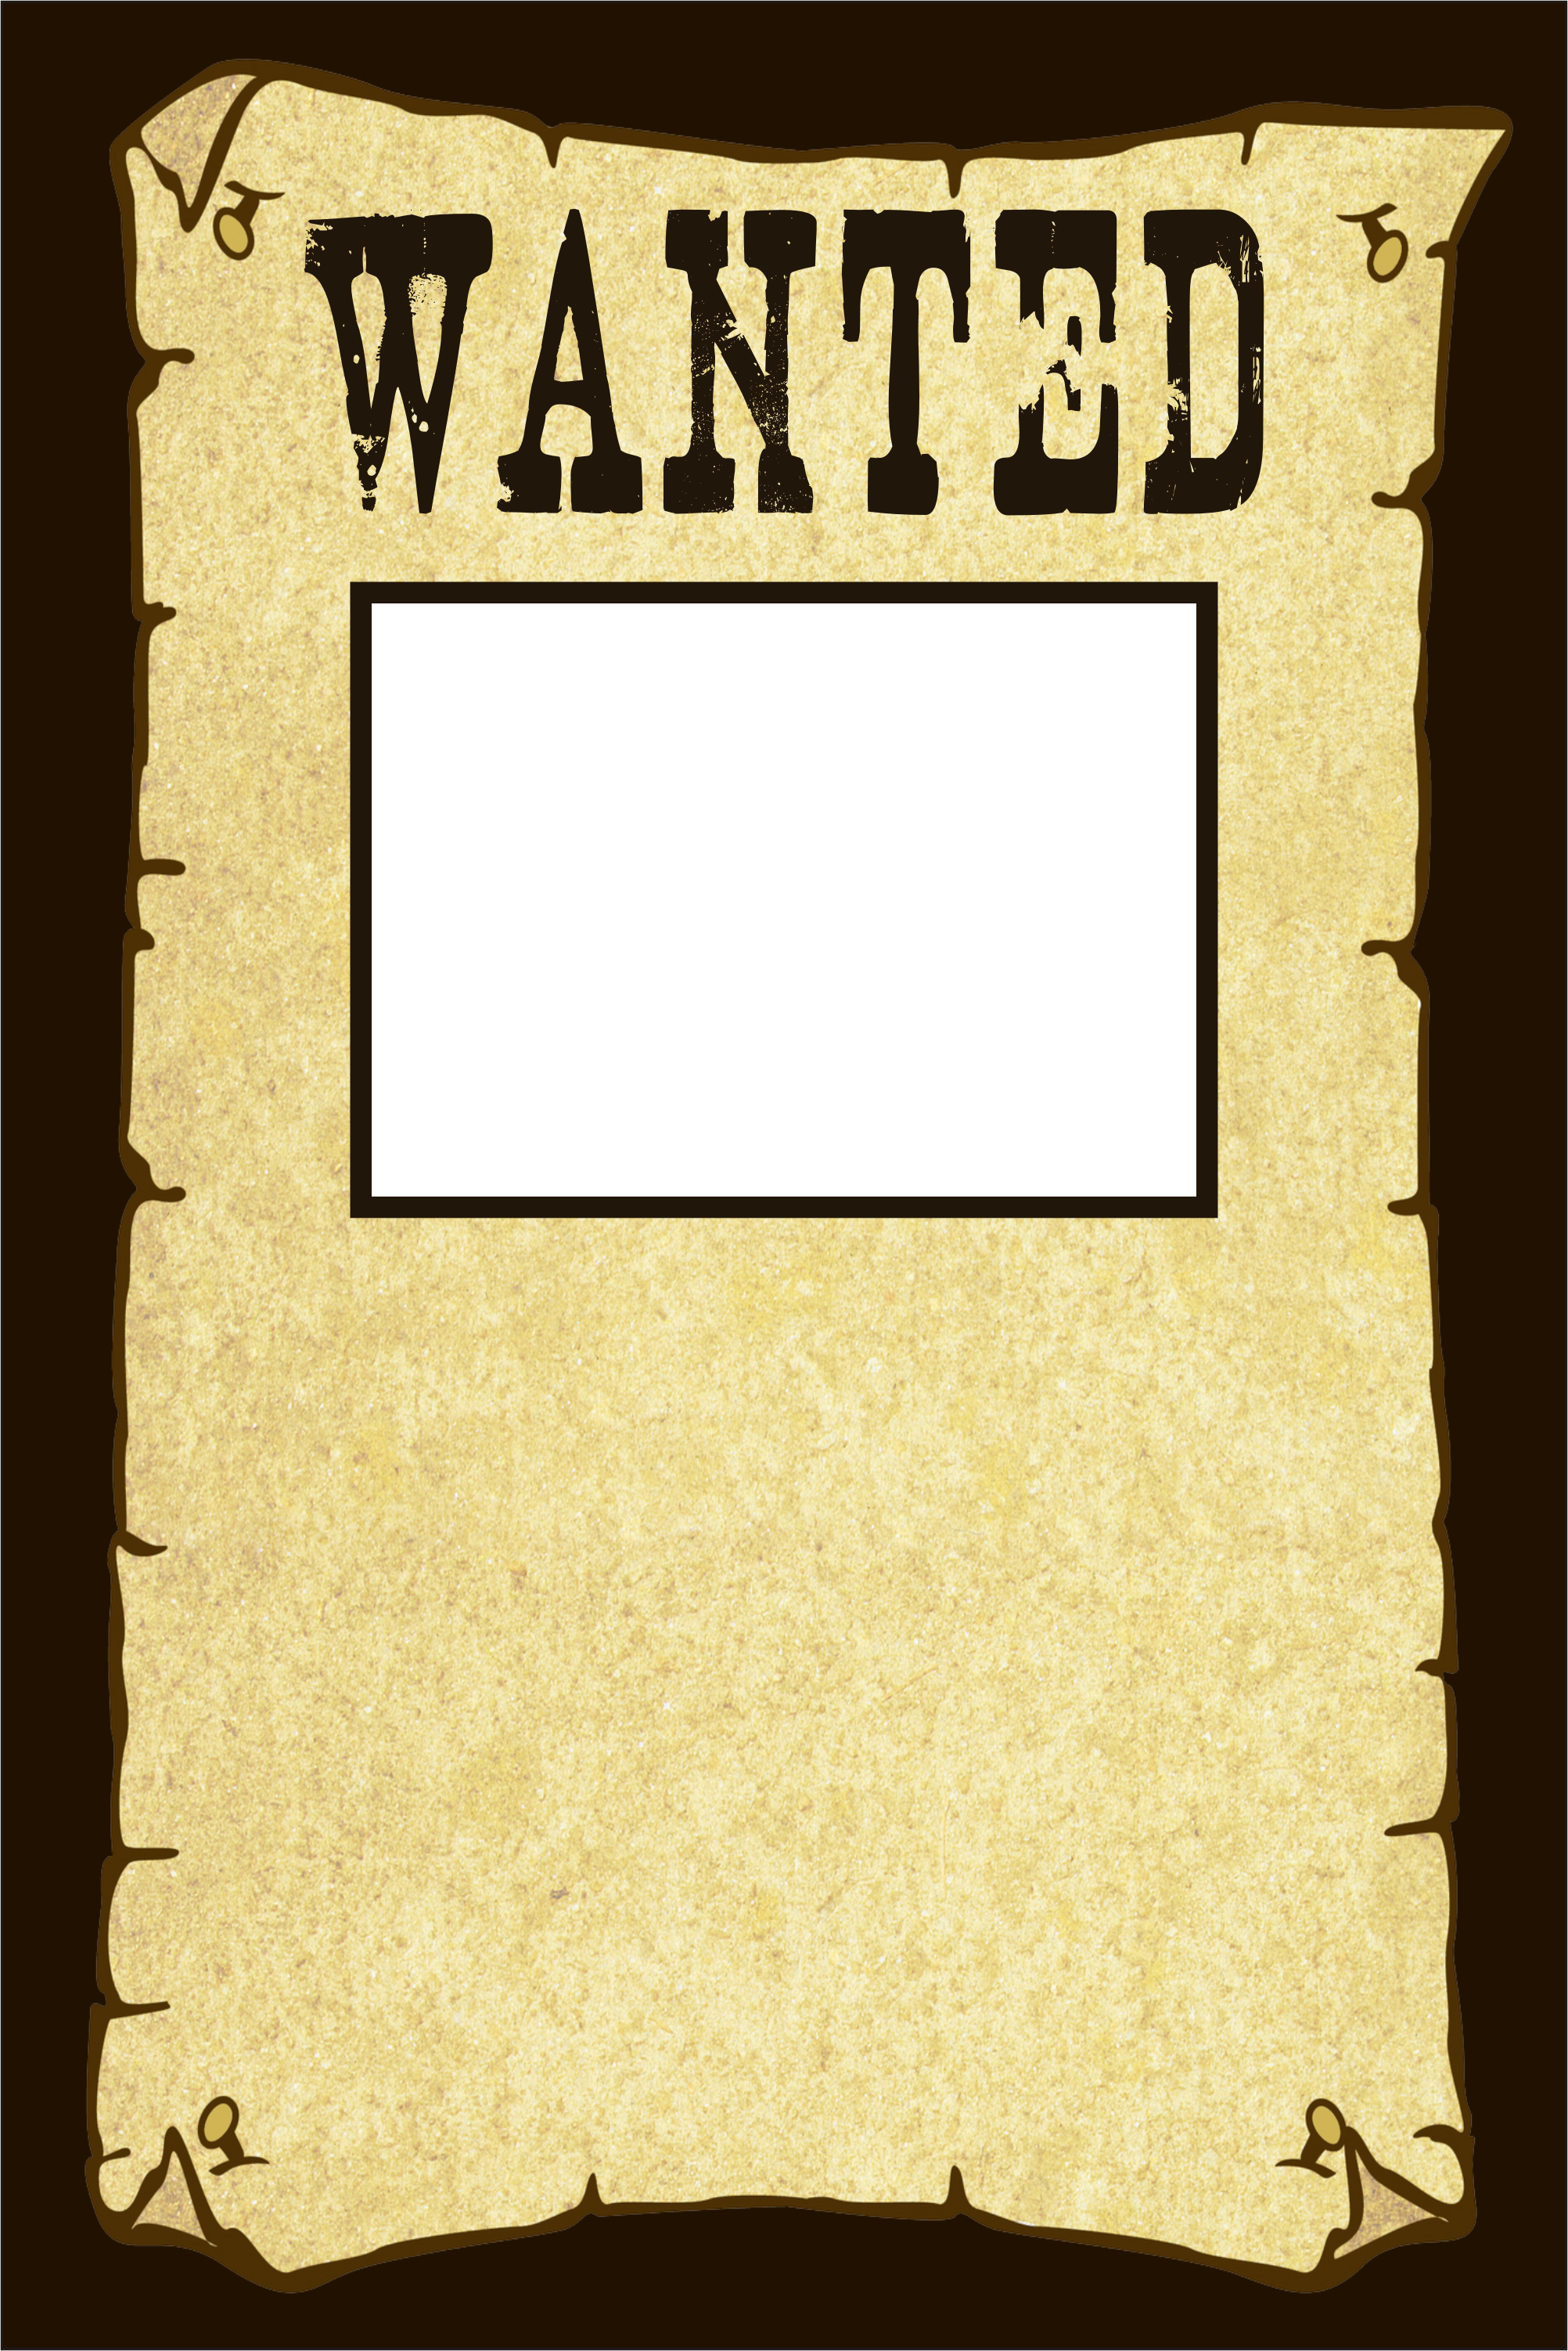 Wanted Poster Invitation Personalized Party Invites